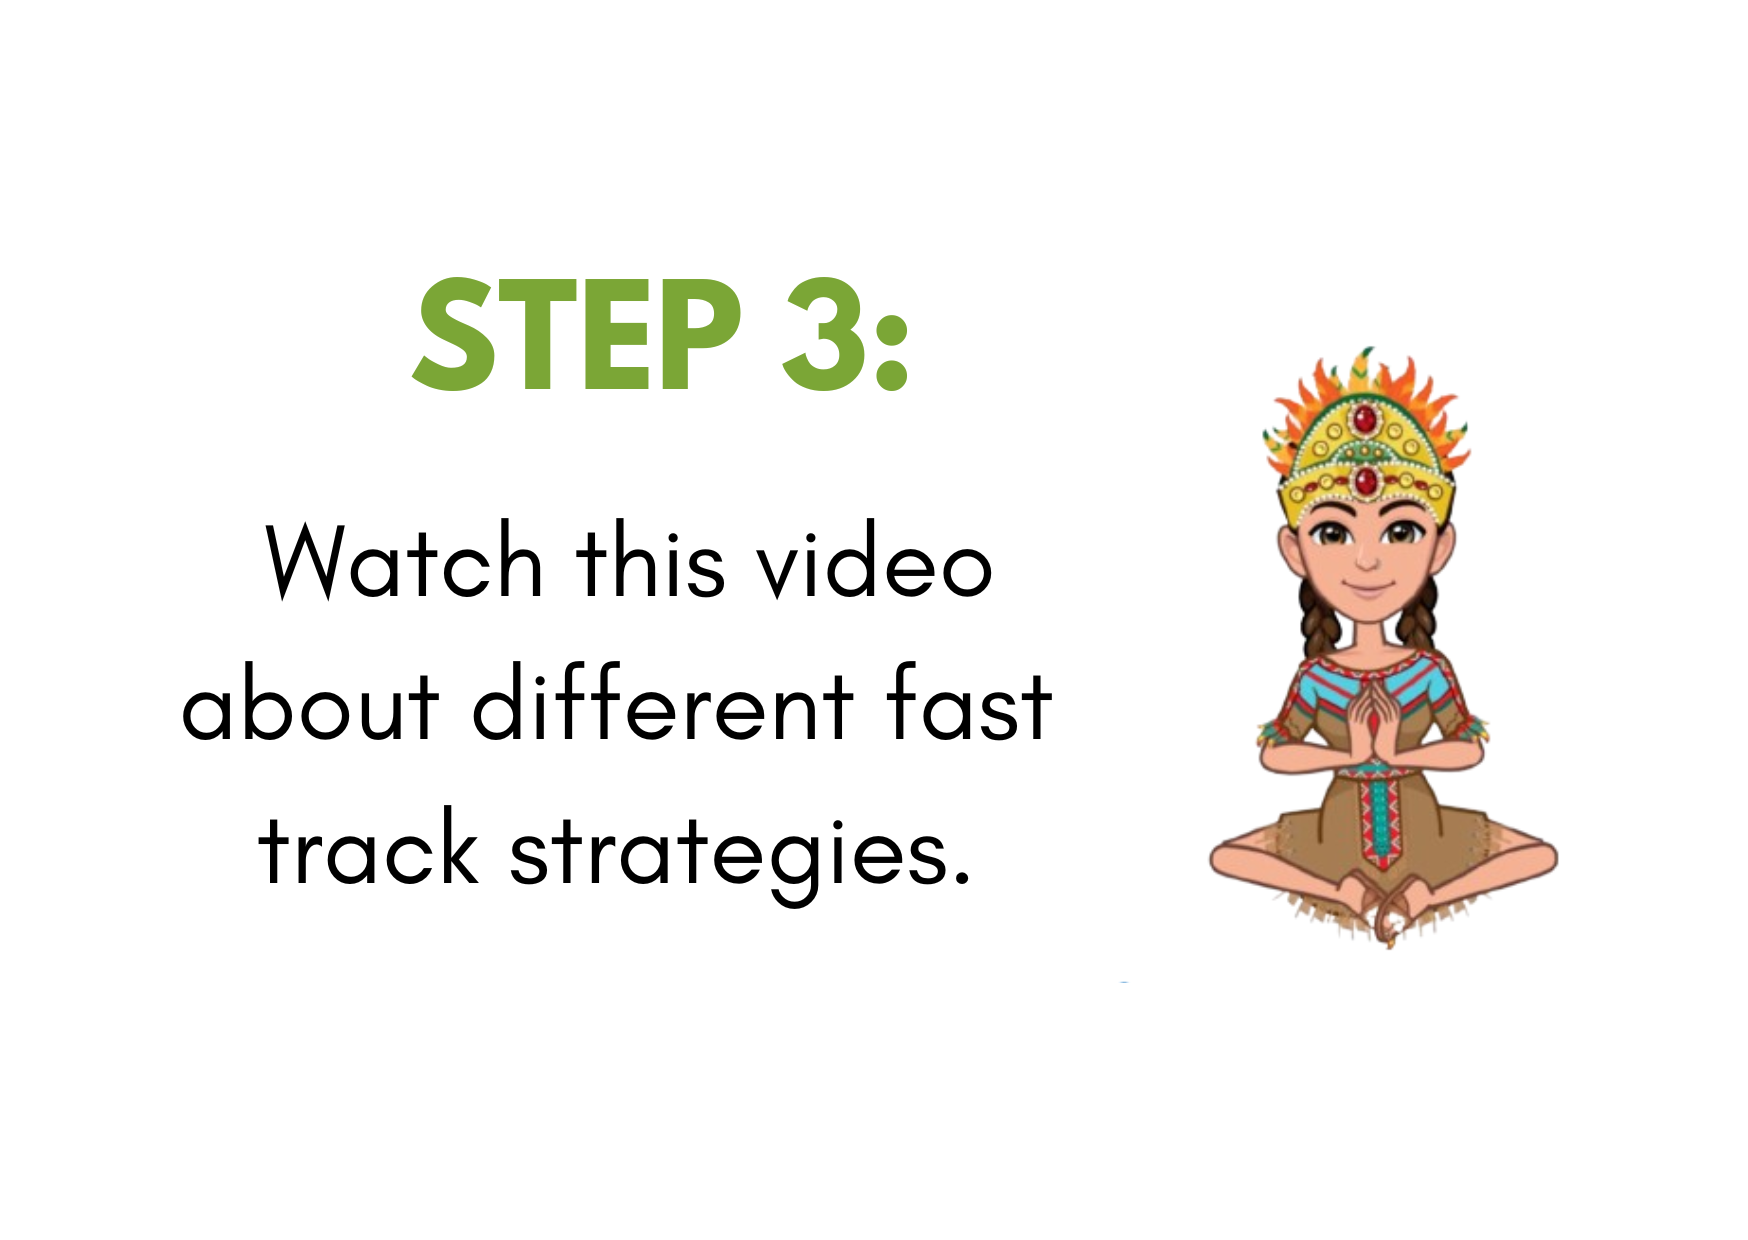 STEP 3 WATCH THIS VIDEO